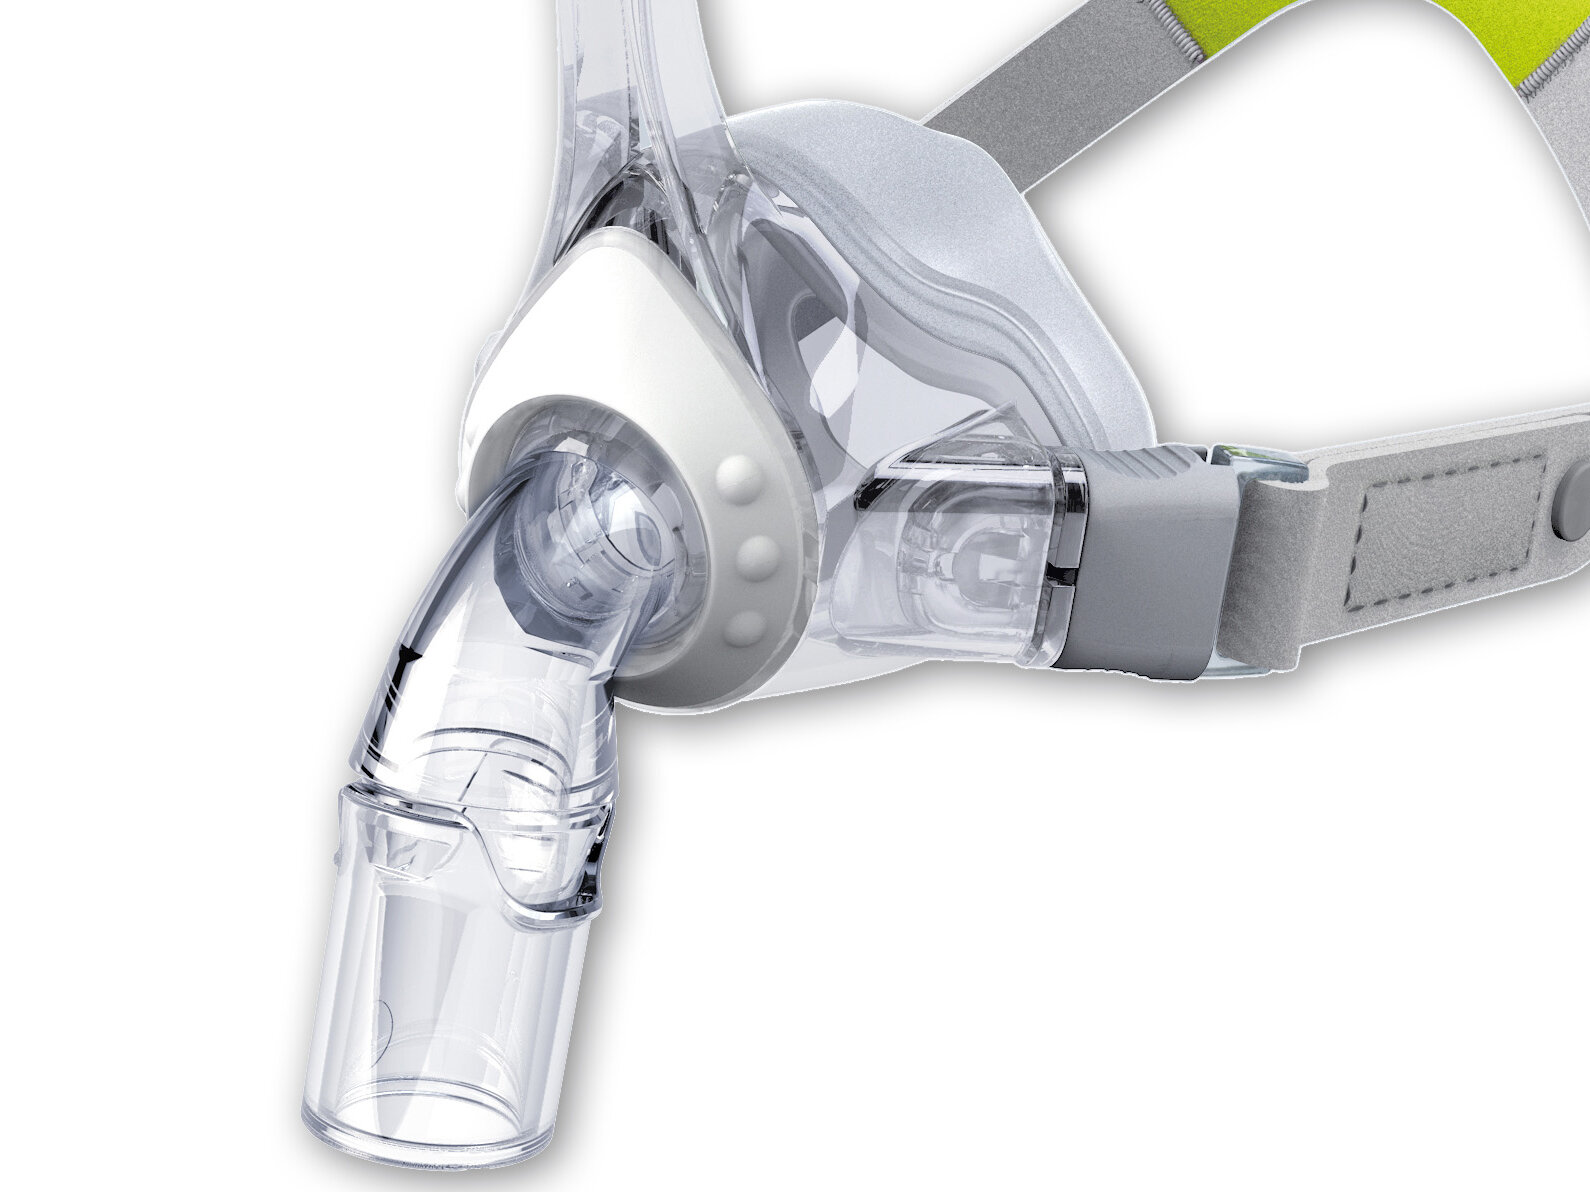  joyceone mask patient interface nasal right